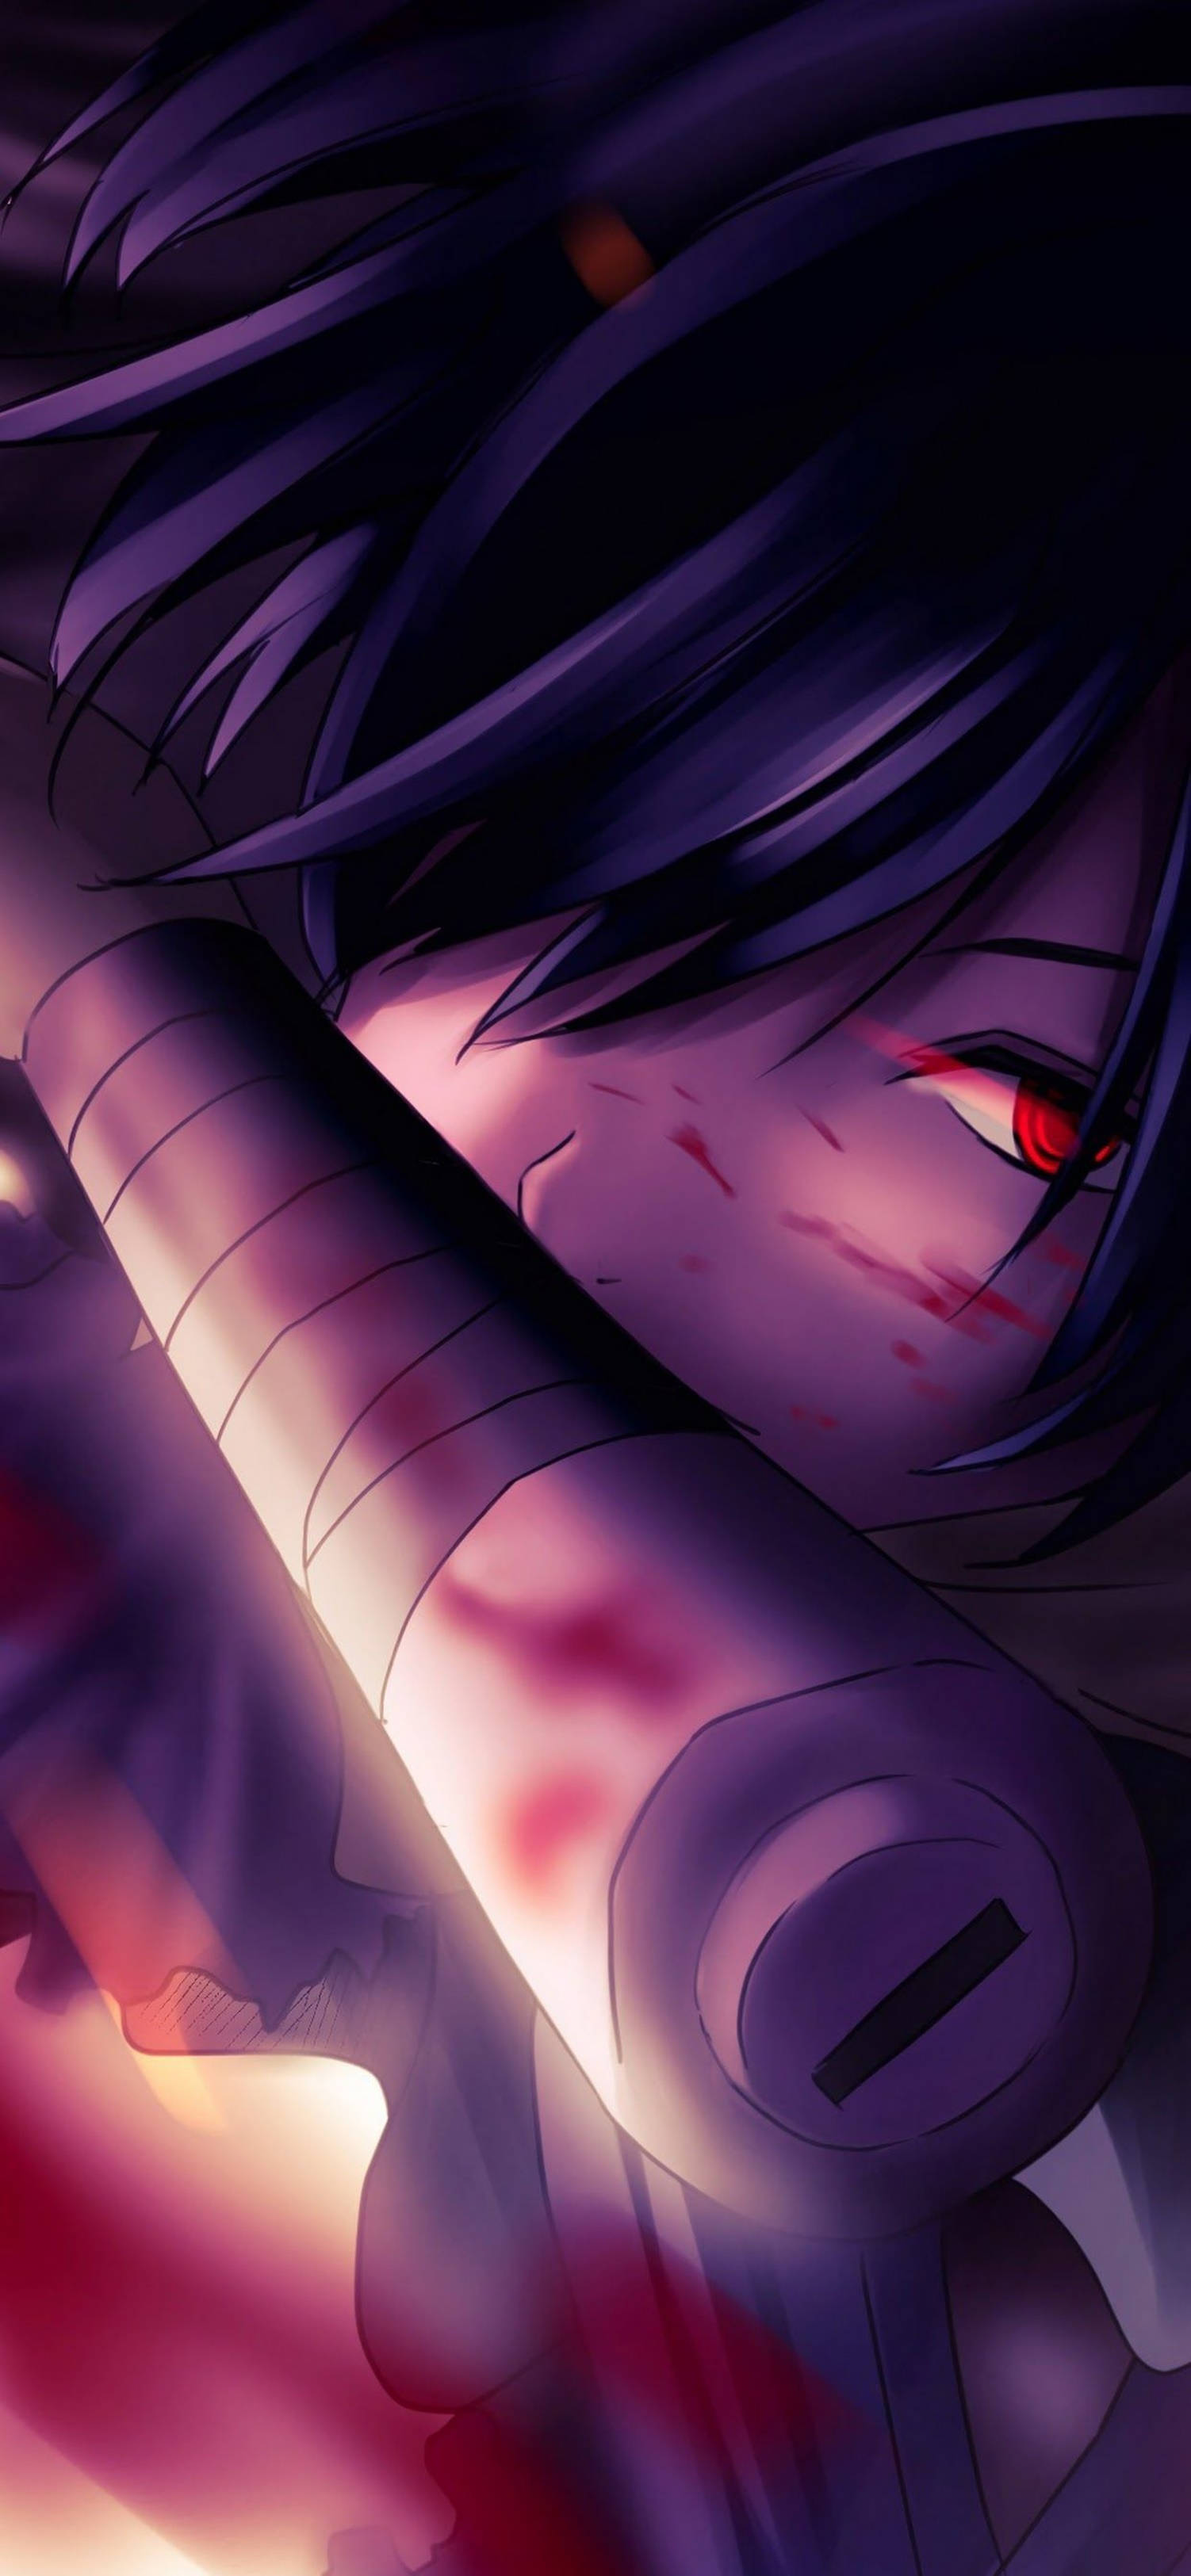 Stunning 4k Anime Battle Scene Features Character With Glowing Red Eyes For Iphone. Background